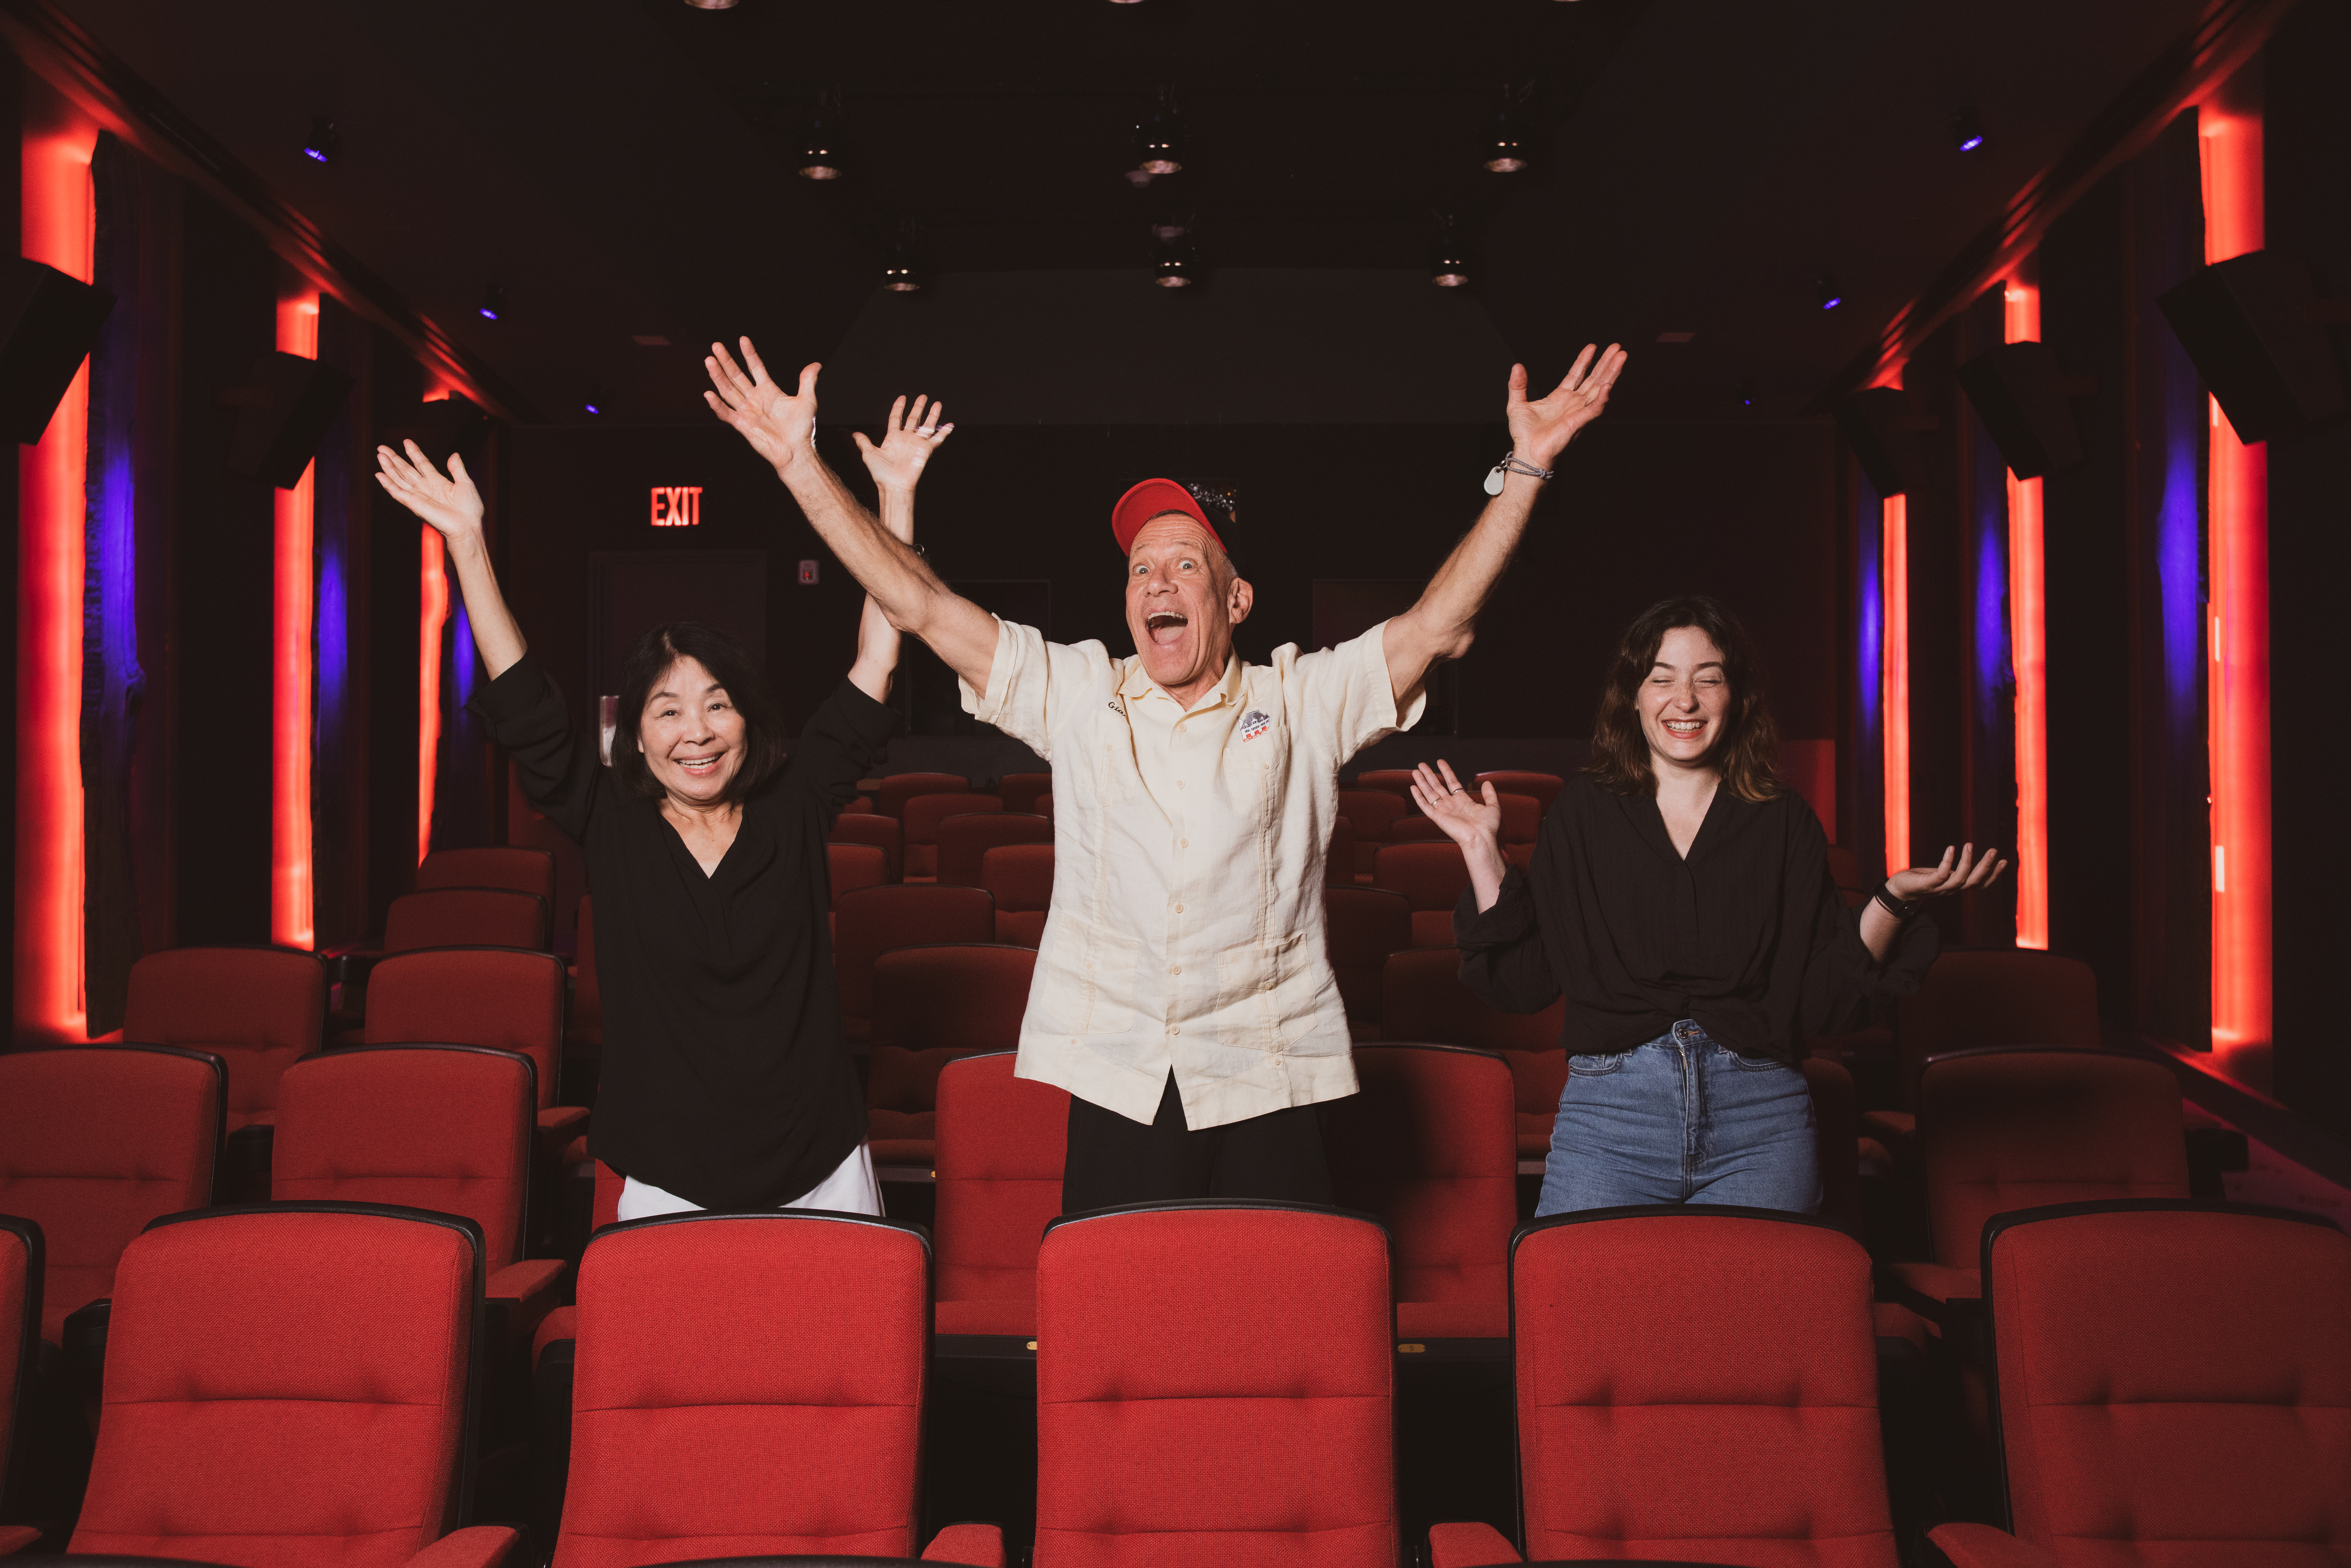 Three people stand with arms outstretched in a dramatically-lit cinema with red seats.